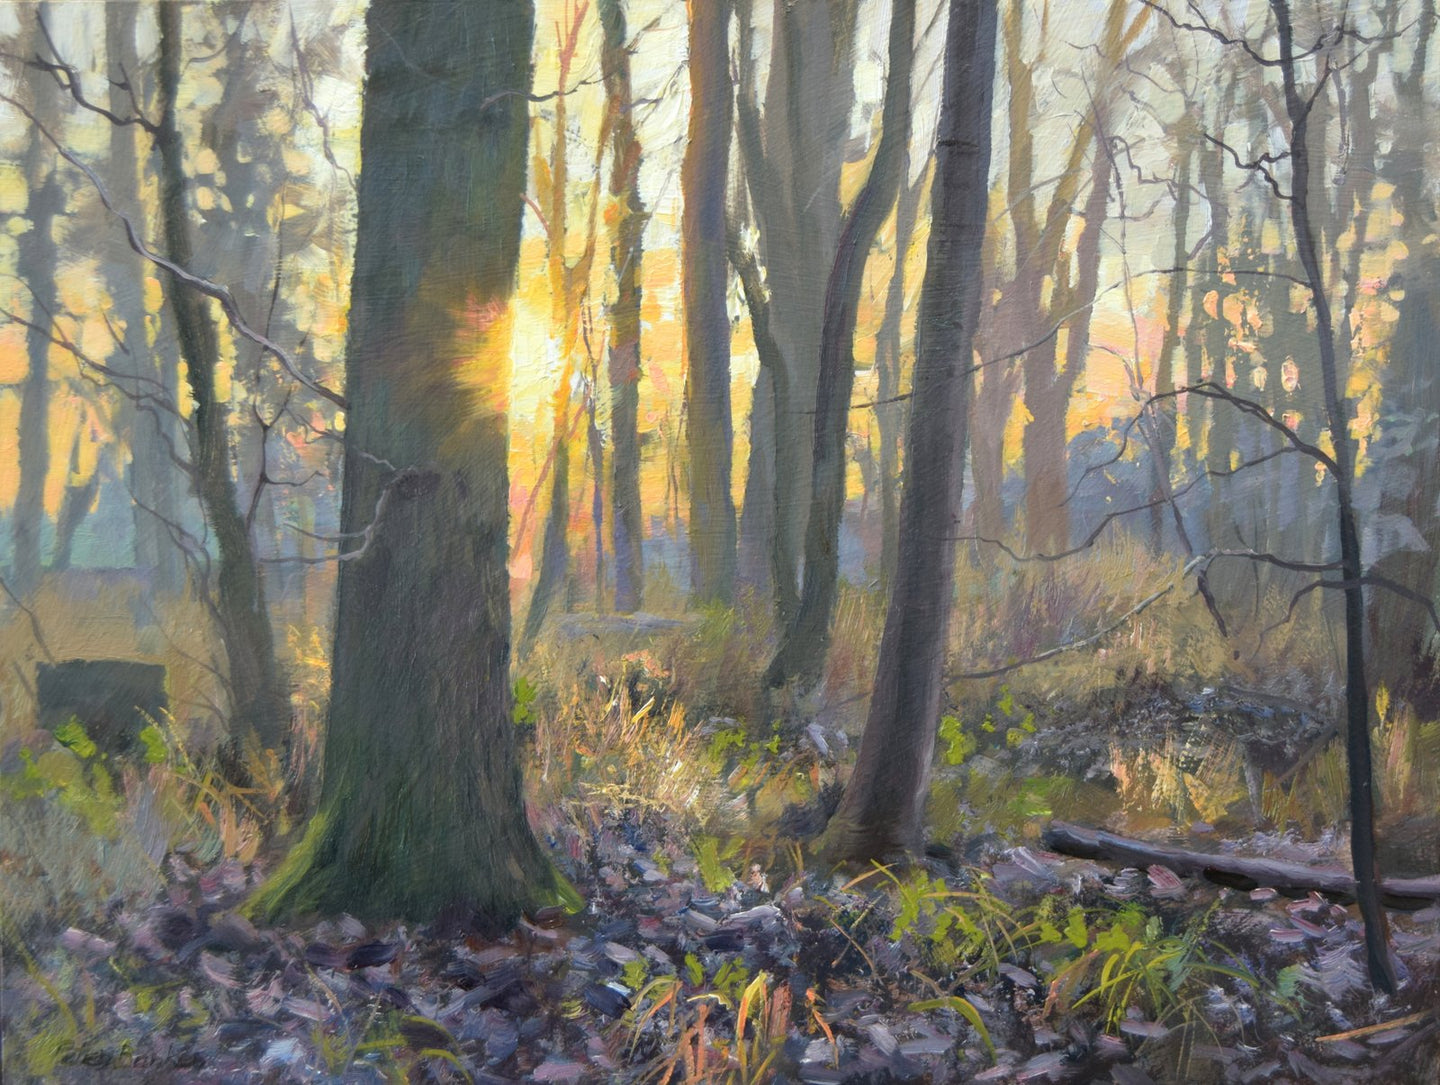 An oil painting of a spinney near my studio on a cold, bright January morning, with a golden sun partially hidden behind an Oak tree, casting a golden light over the woodland.